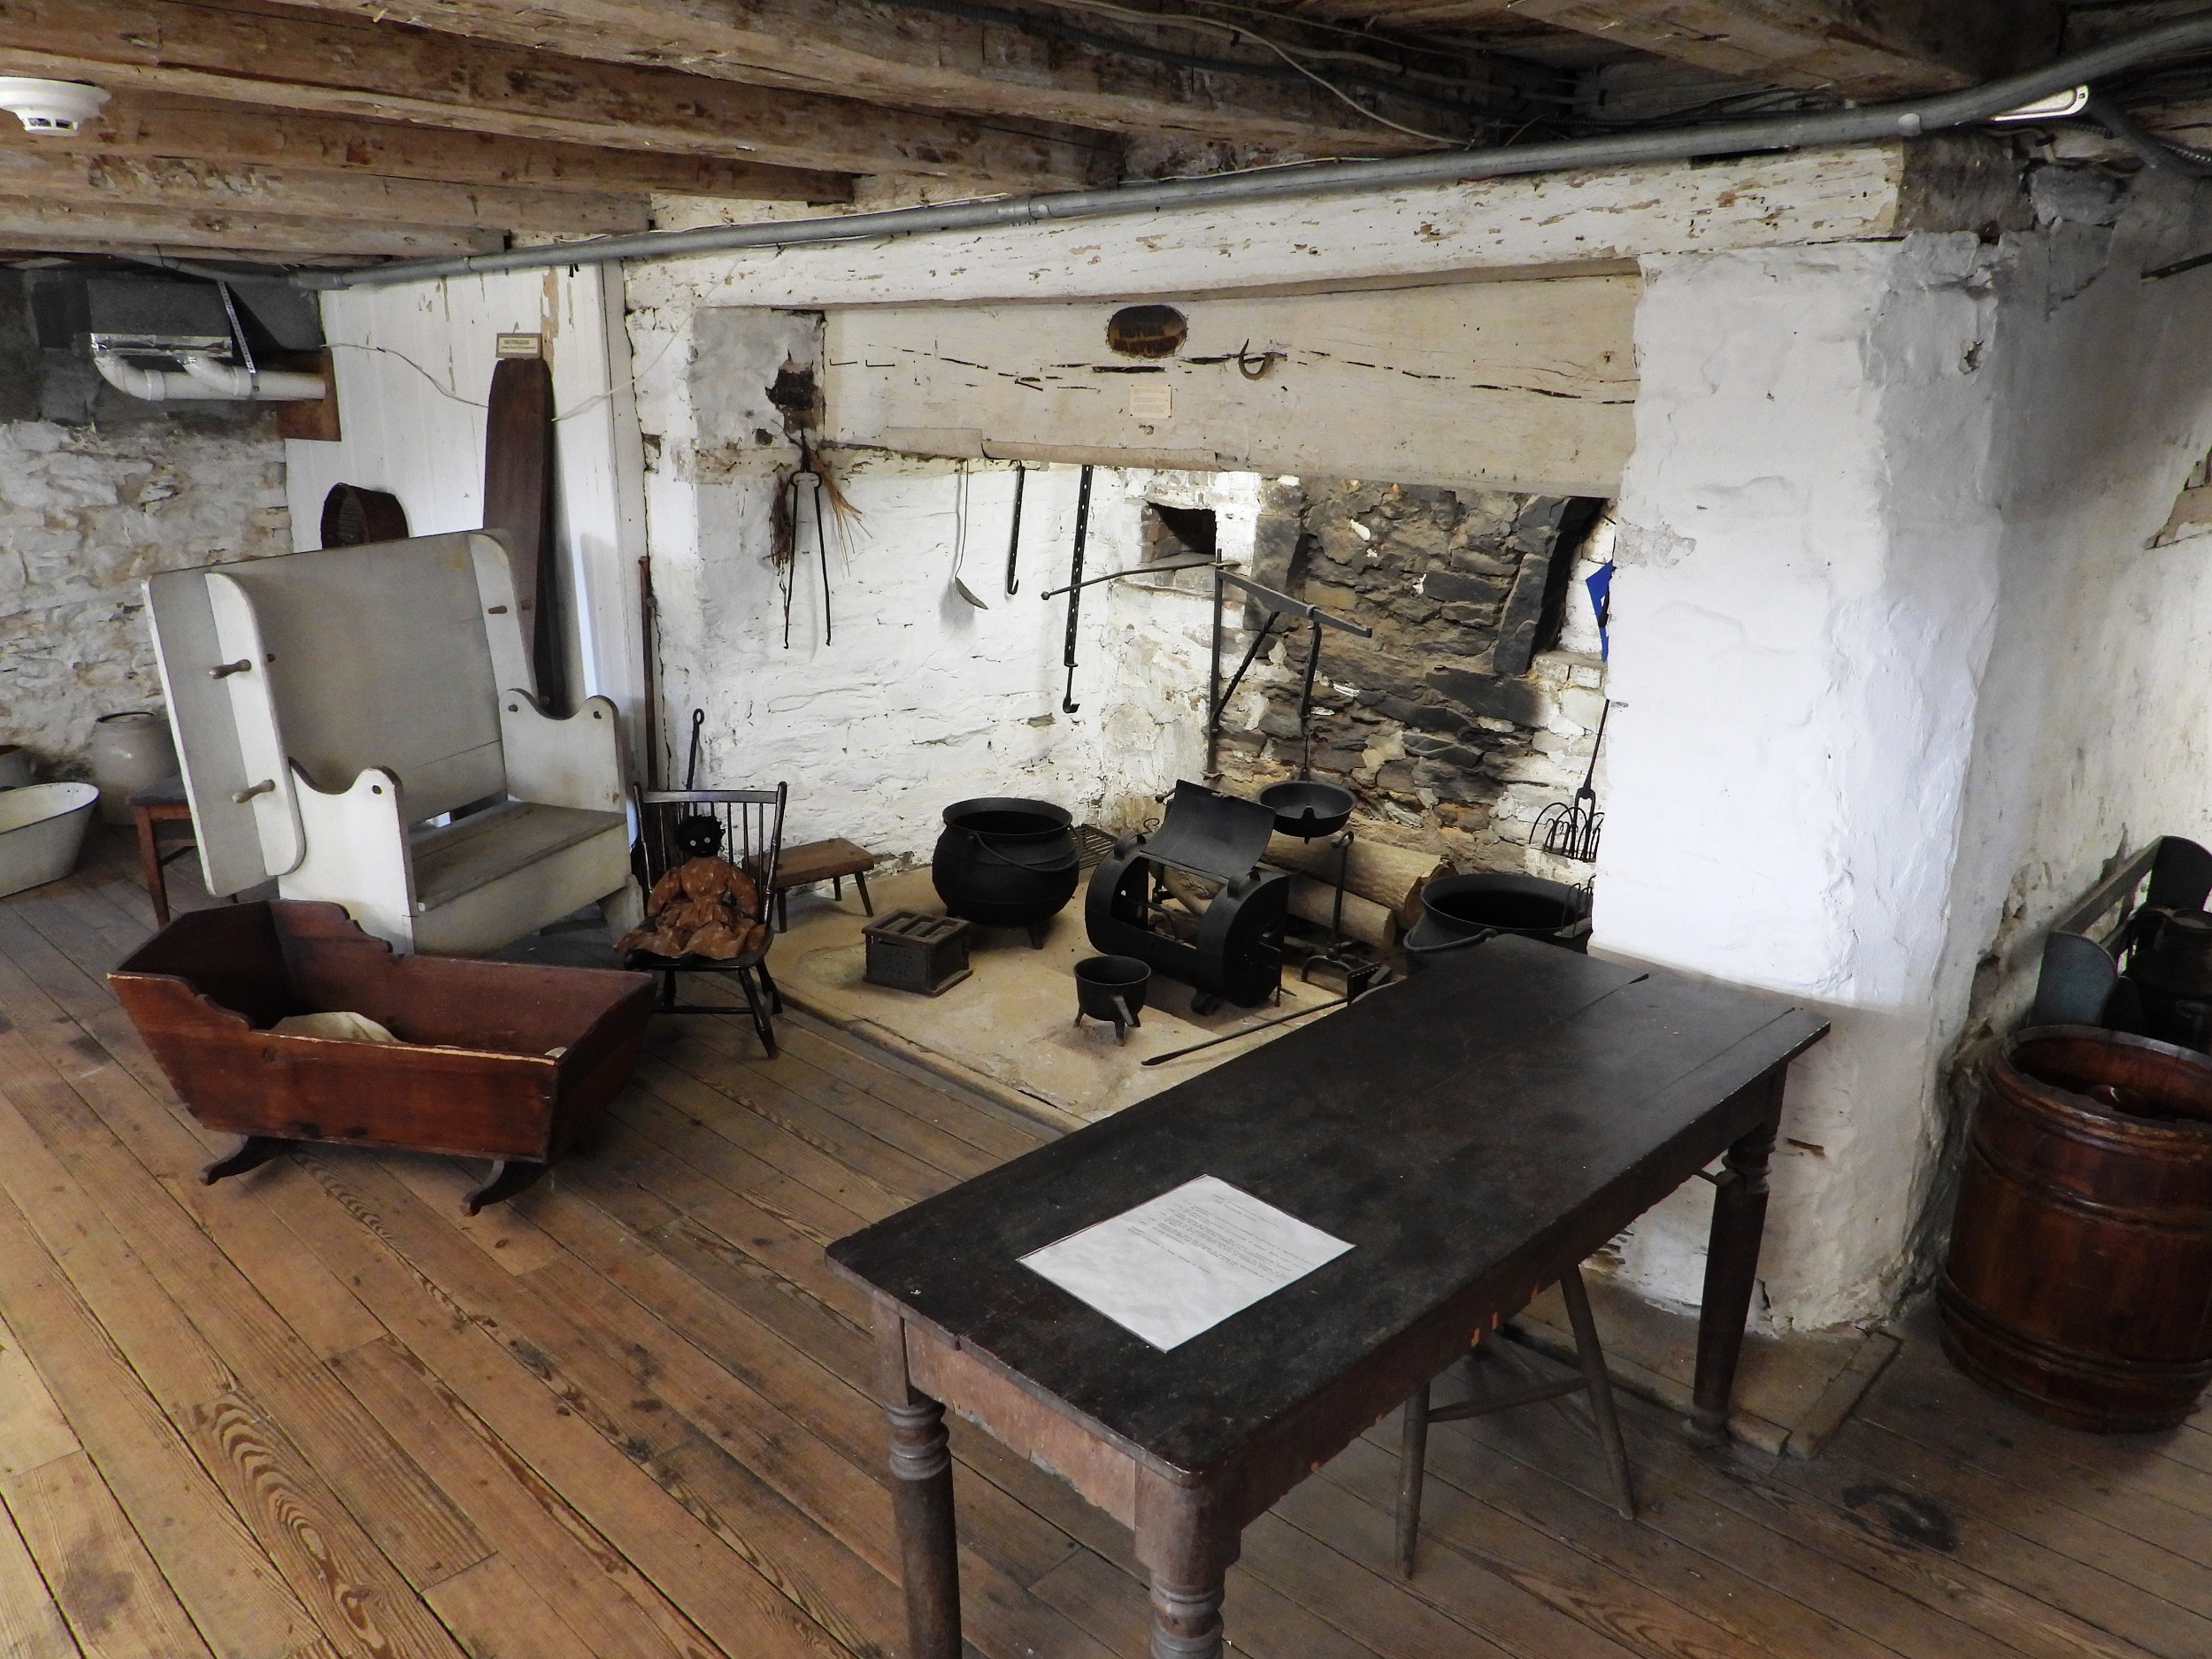 Interior of a replica colonial American basement kitchen, with a wide, whitewashed fireplace, a high-backed bench, a wooden cradle, and a table in front